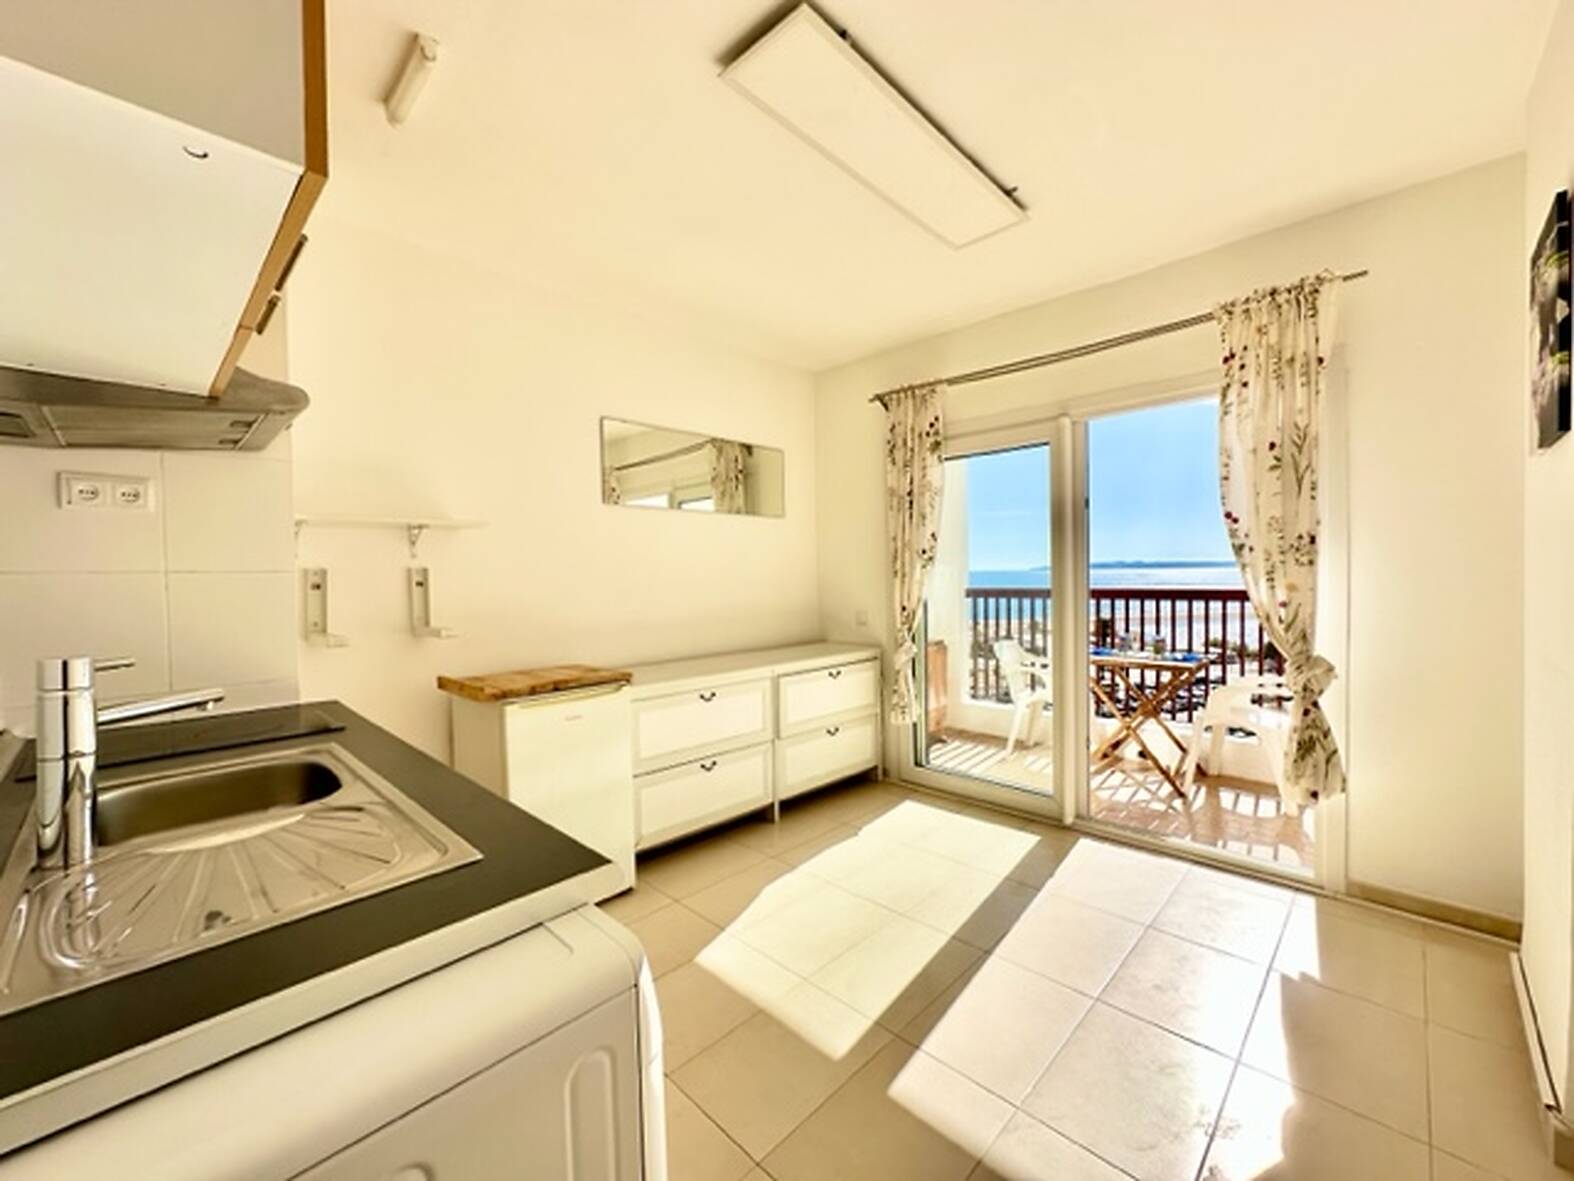 Studio on the seafront, for sale in Empuriabrava